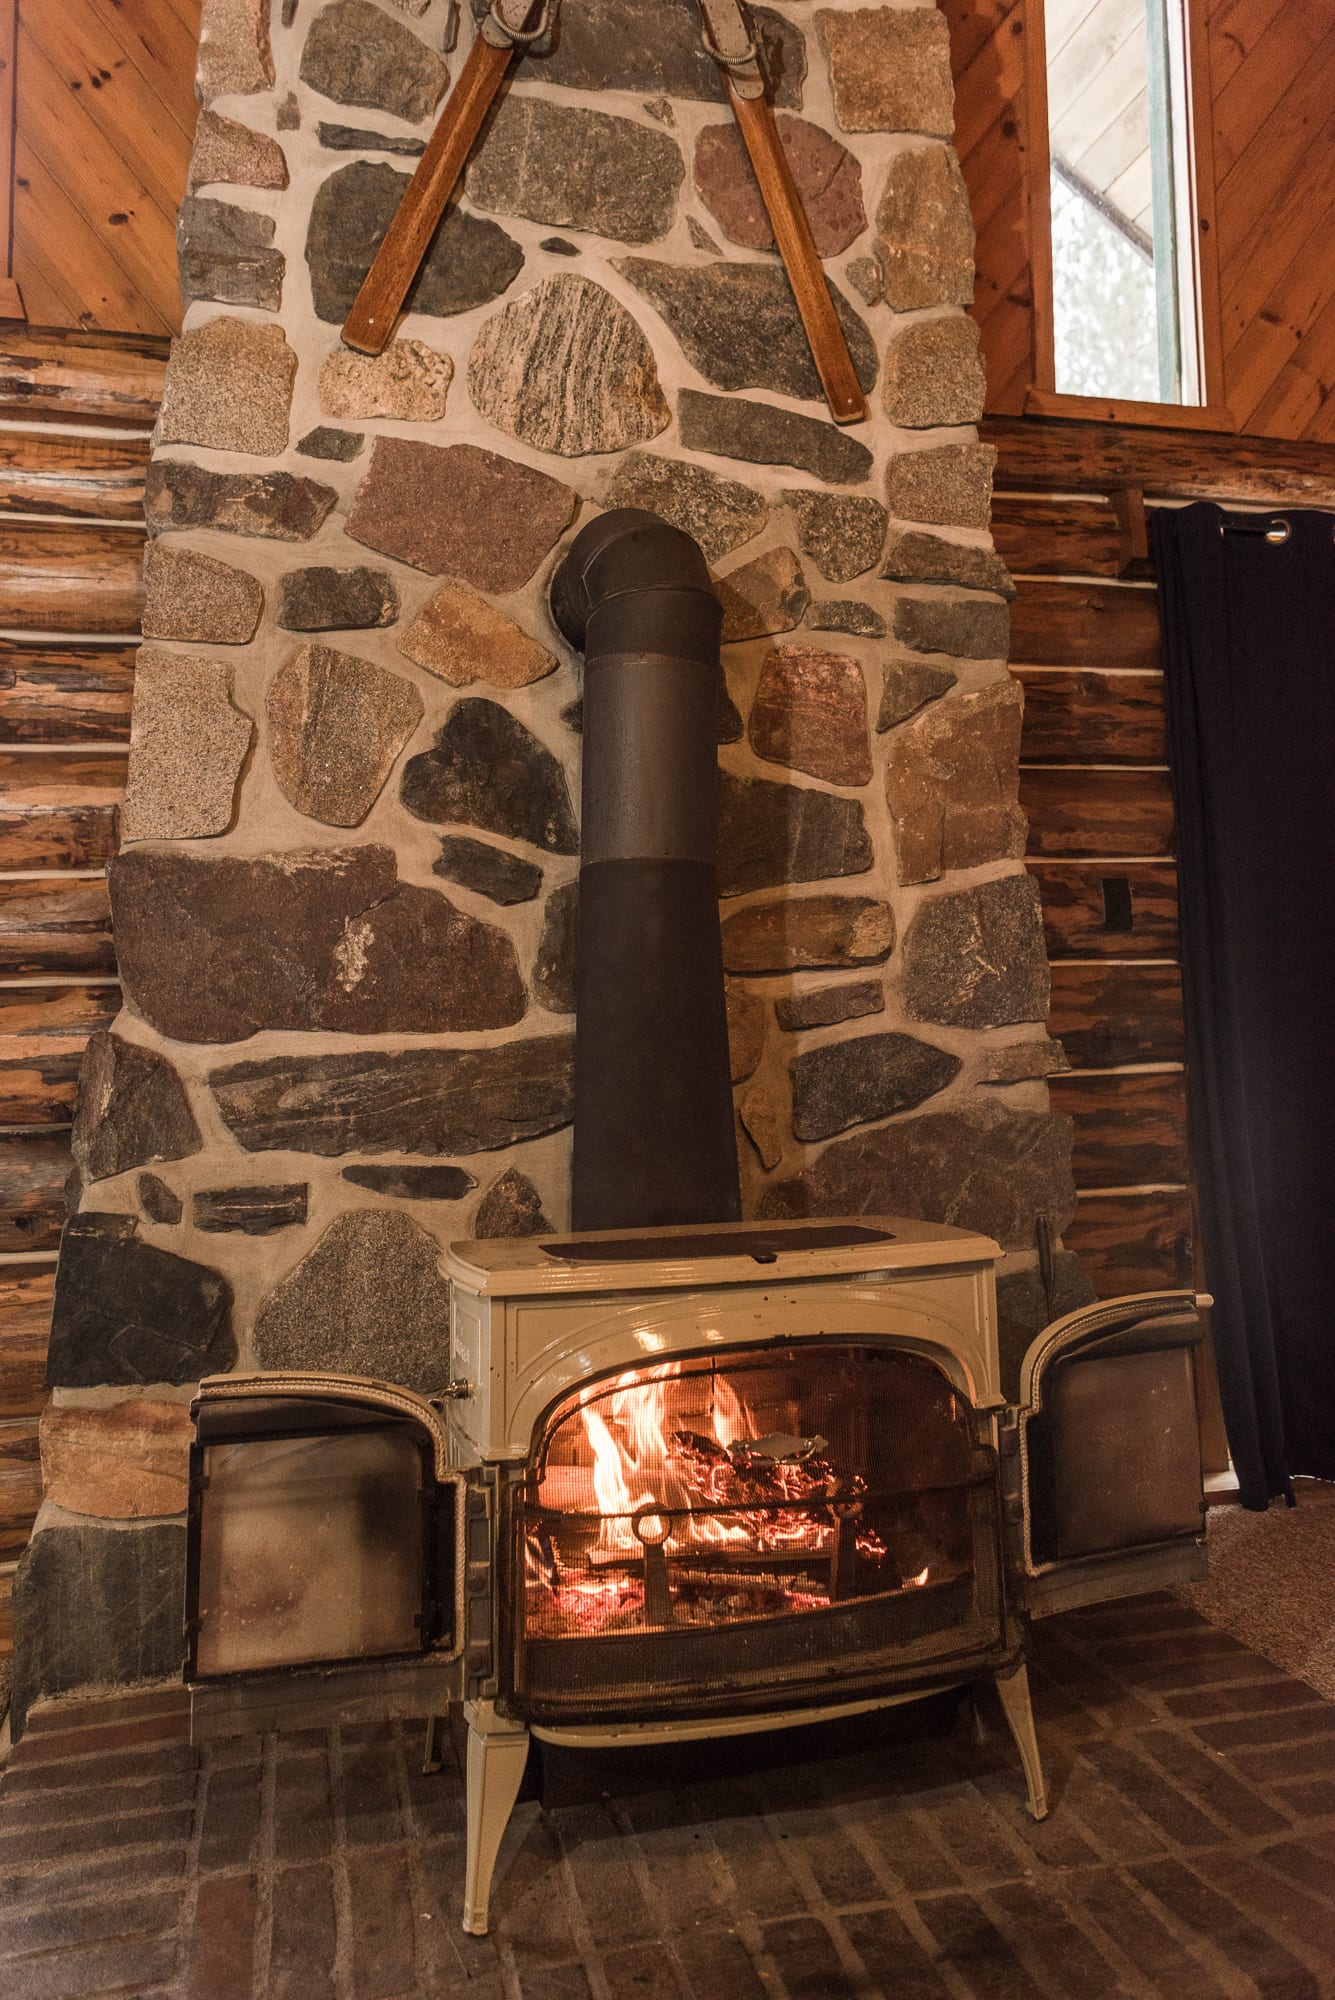 Lakeview cabin wood burning stove/fireplace.